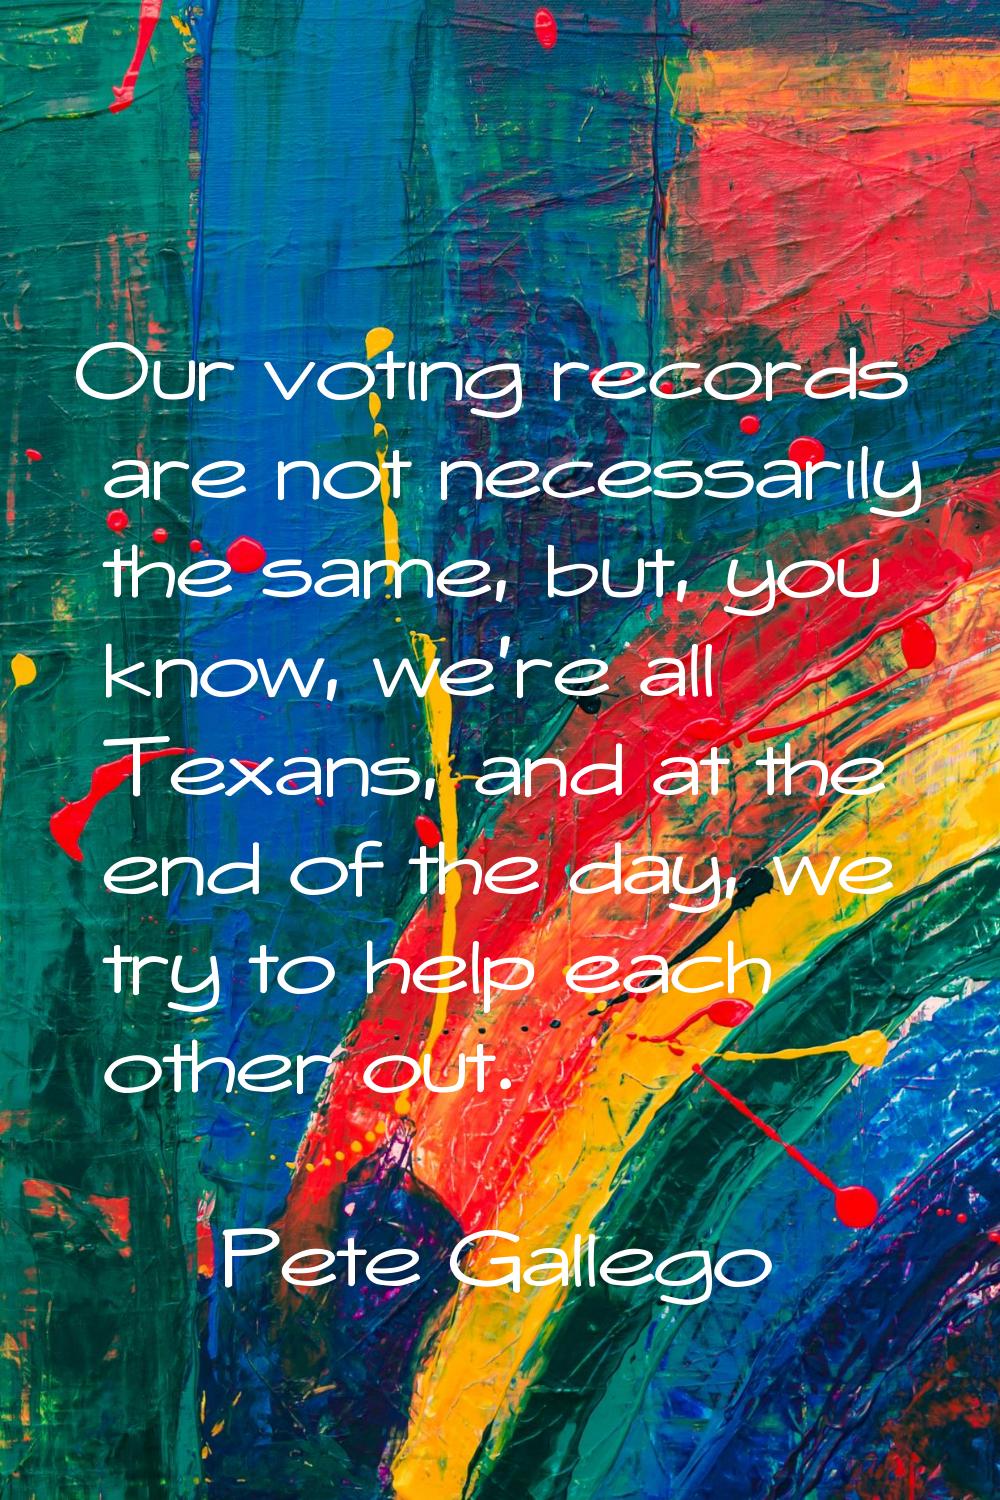 Our voting records are not necessarily the same, but, you know, we're all Texans, and at the end of